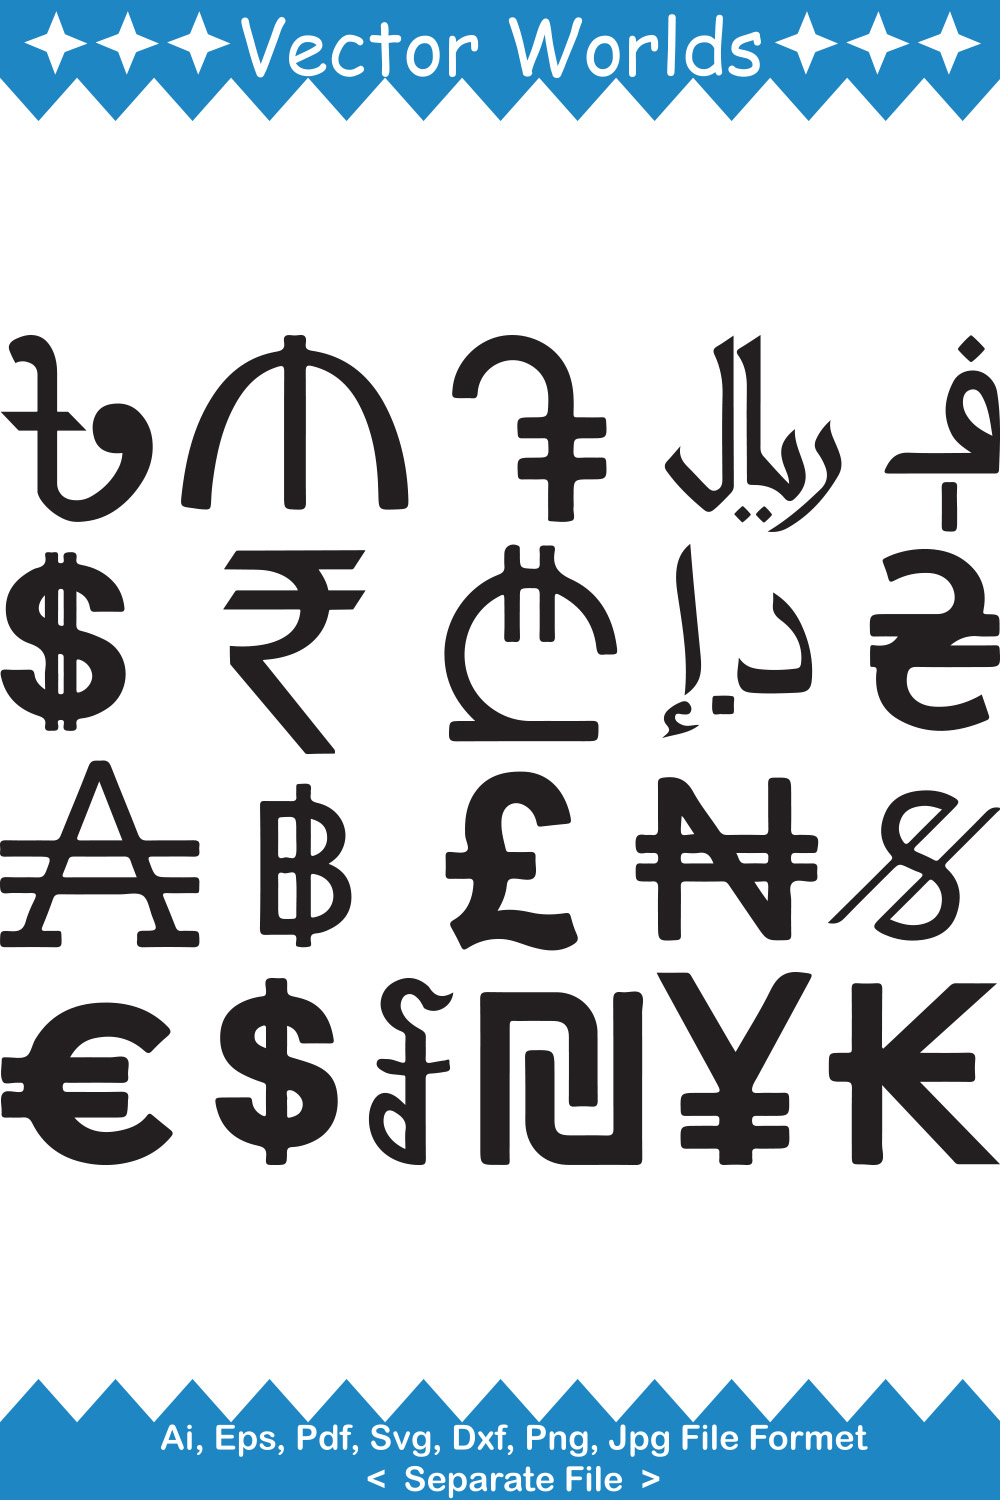 Set of unique images of silhouettes of currency symbols